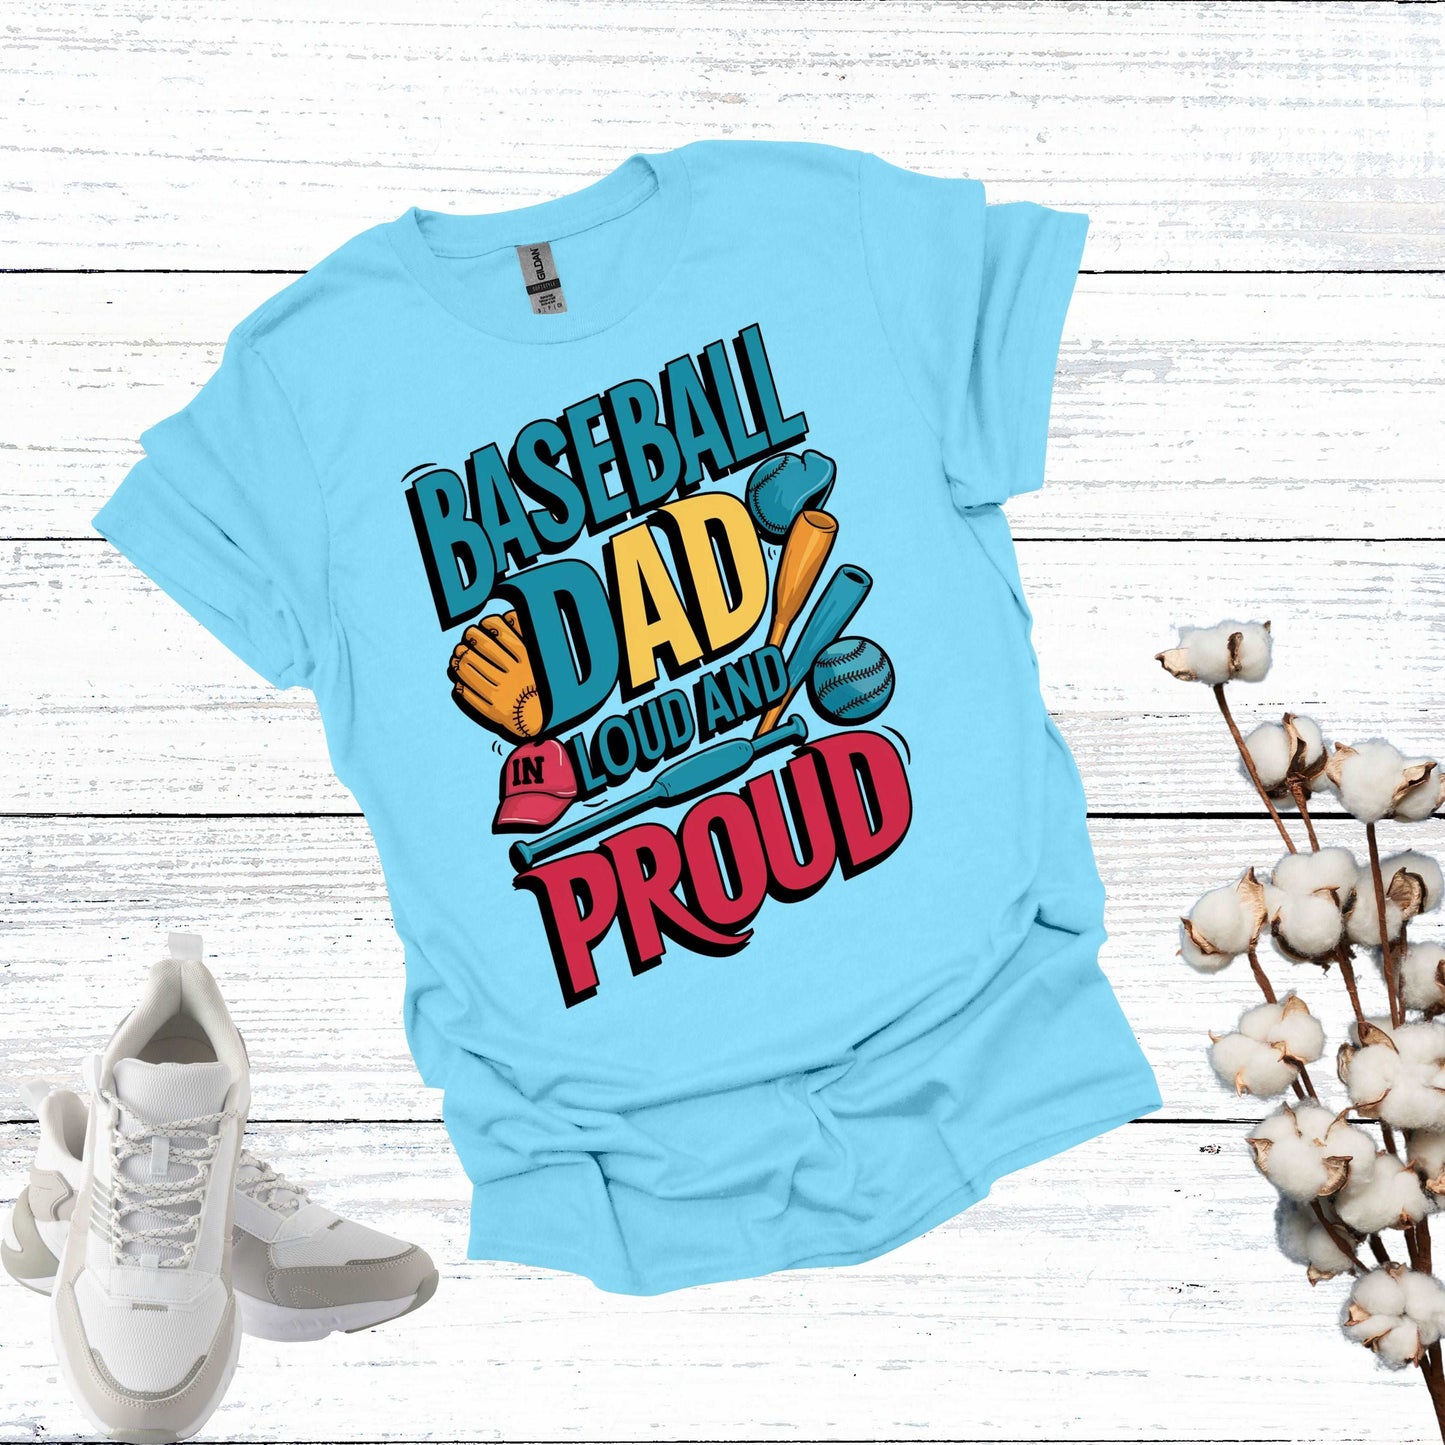 Baseball Dad Sky Shirt - Fathers are Loud and Proud